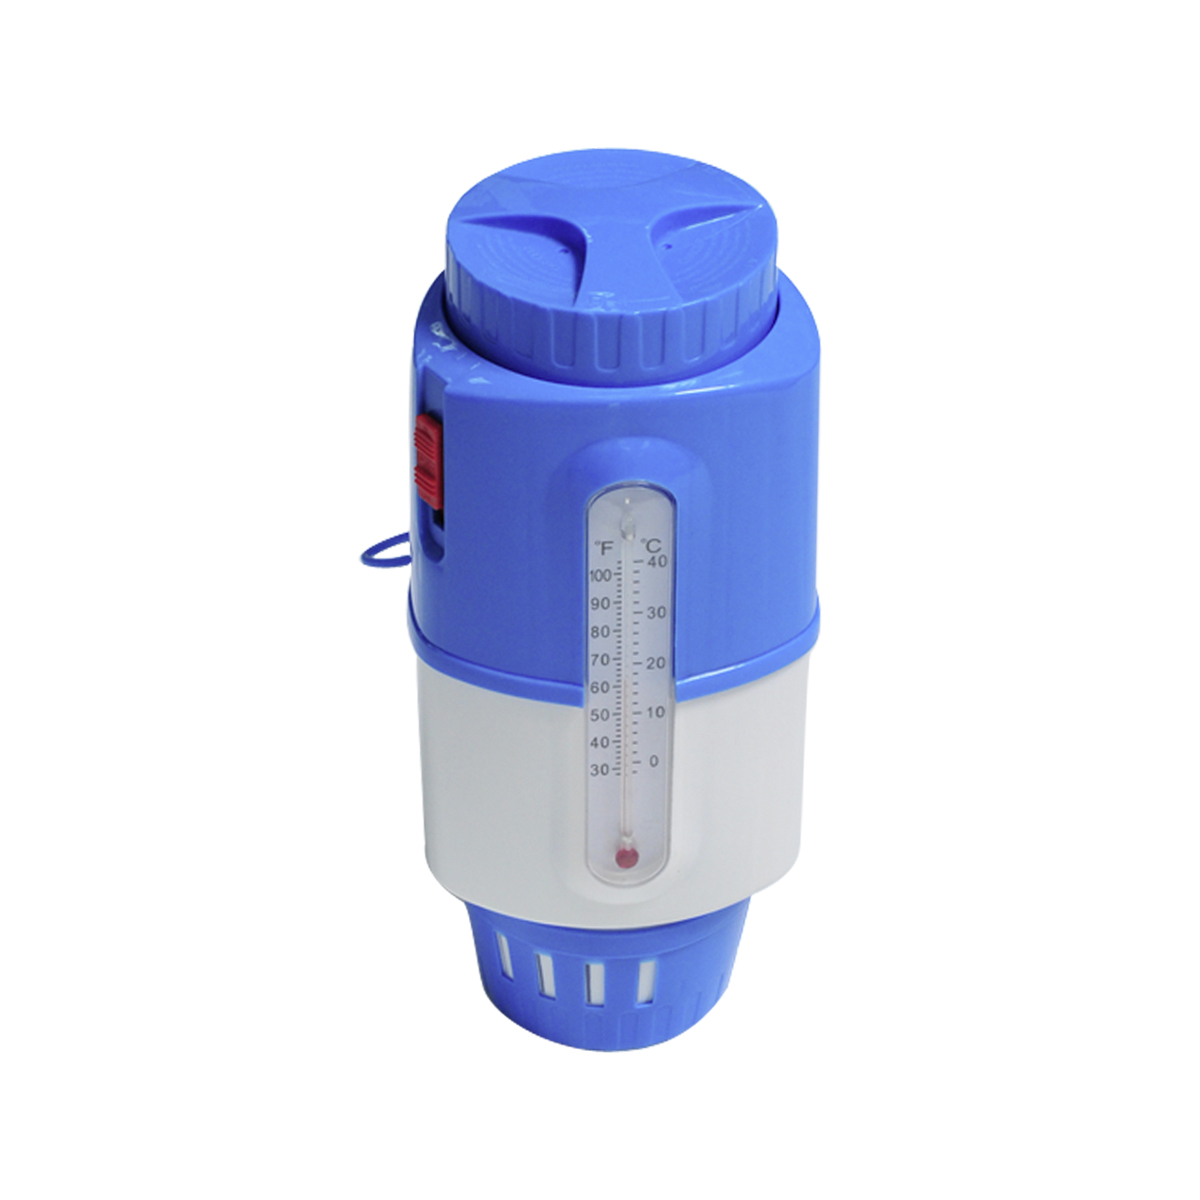 Smart Chlorine Dispenser for 3” tablets with thermometer type “B” blue single packed with shut-off function Smart Chlorine Dispenser for 3” tablets with thermometer type “B” blue single packed with shut-off function